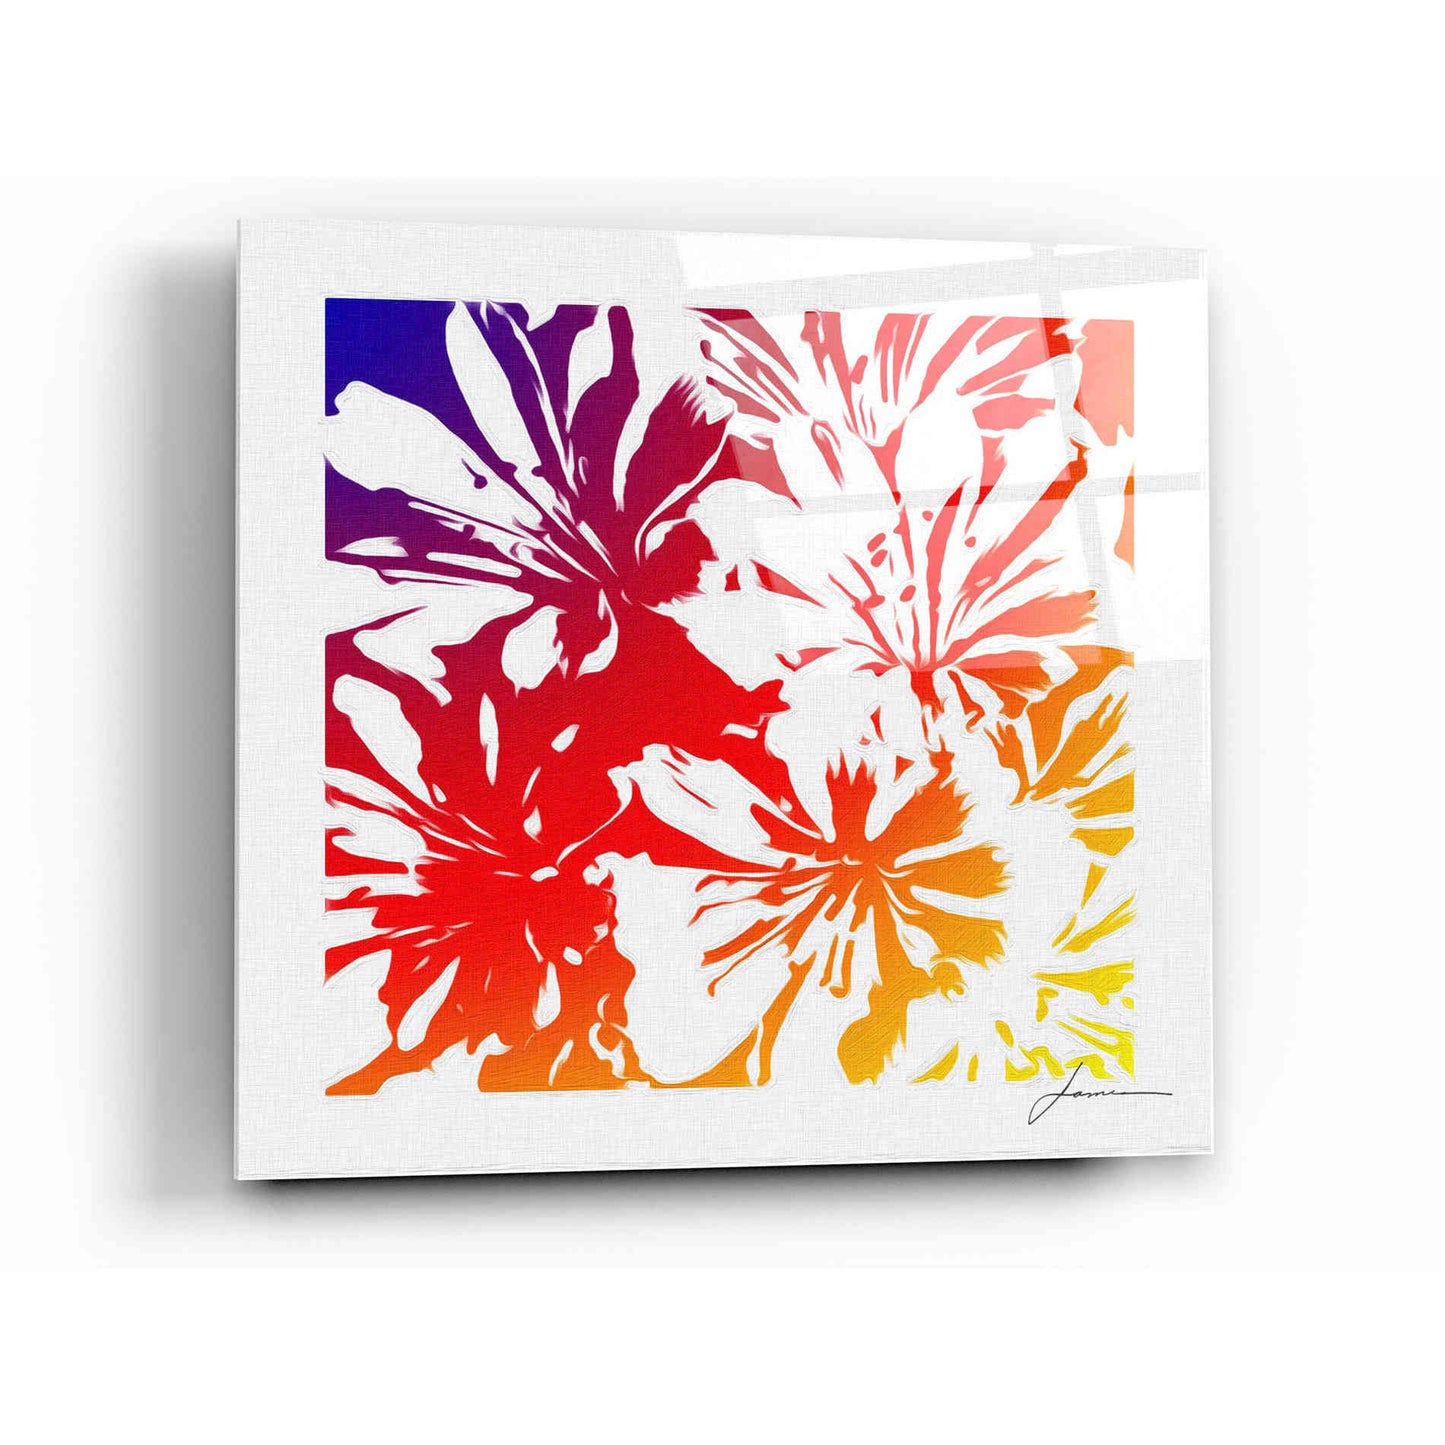 Epic Art 'Floral Brights I' by James Burghardt, Acrylic Glass Wall Art,12x12